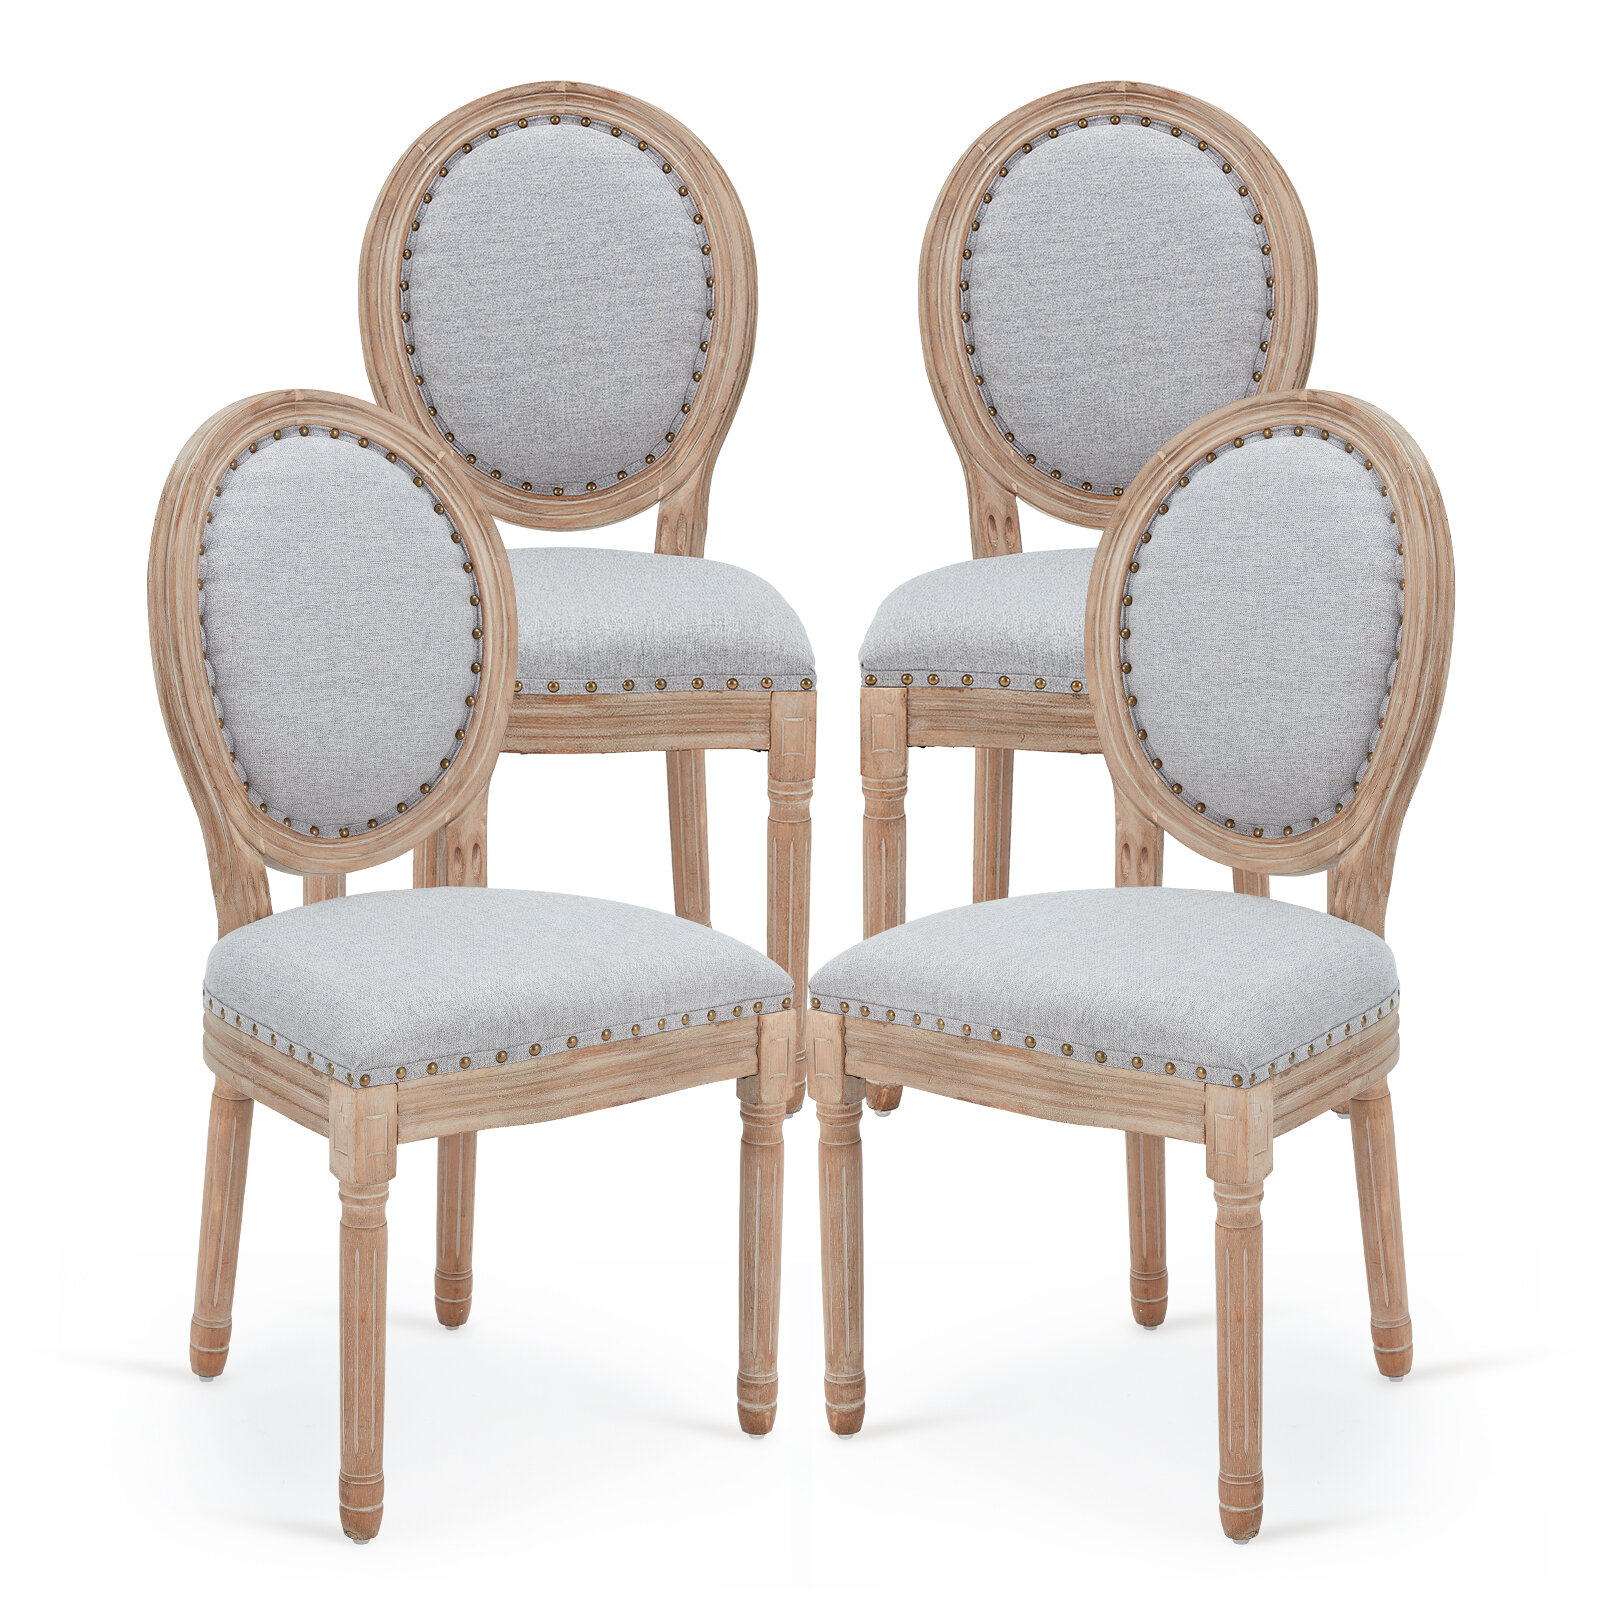 Jair King Louis Back Side Chair (Set of 2) - A.M Wood Store